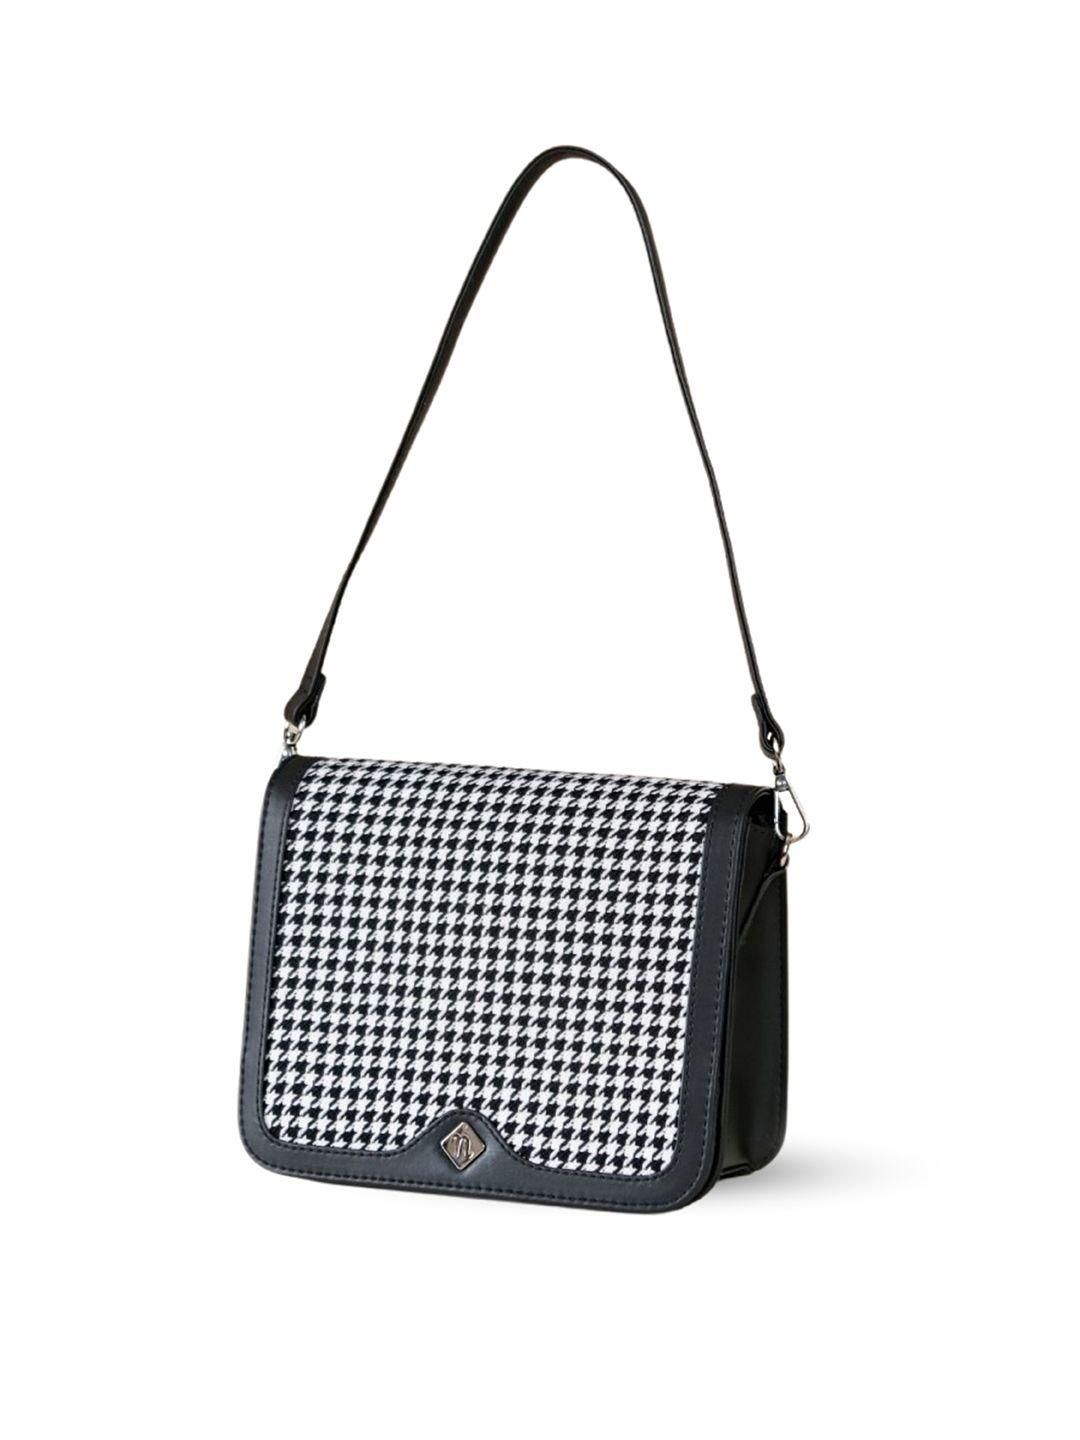 nestasia black checked structured sling bag with tasselled